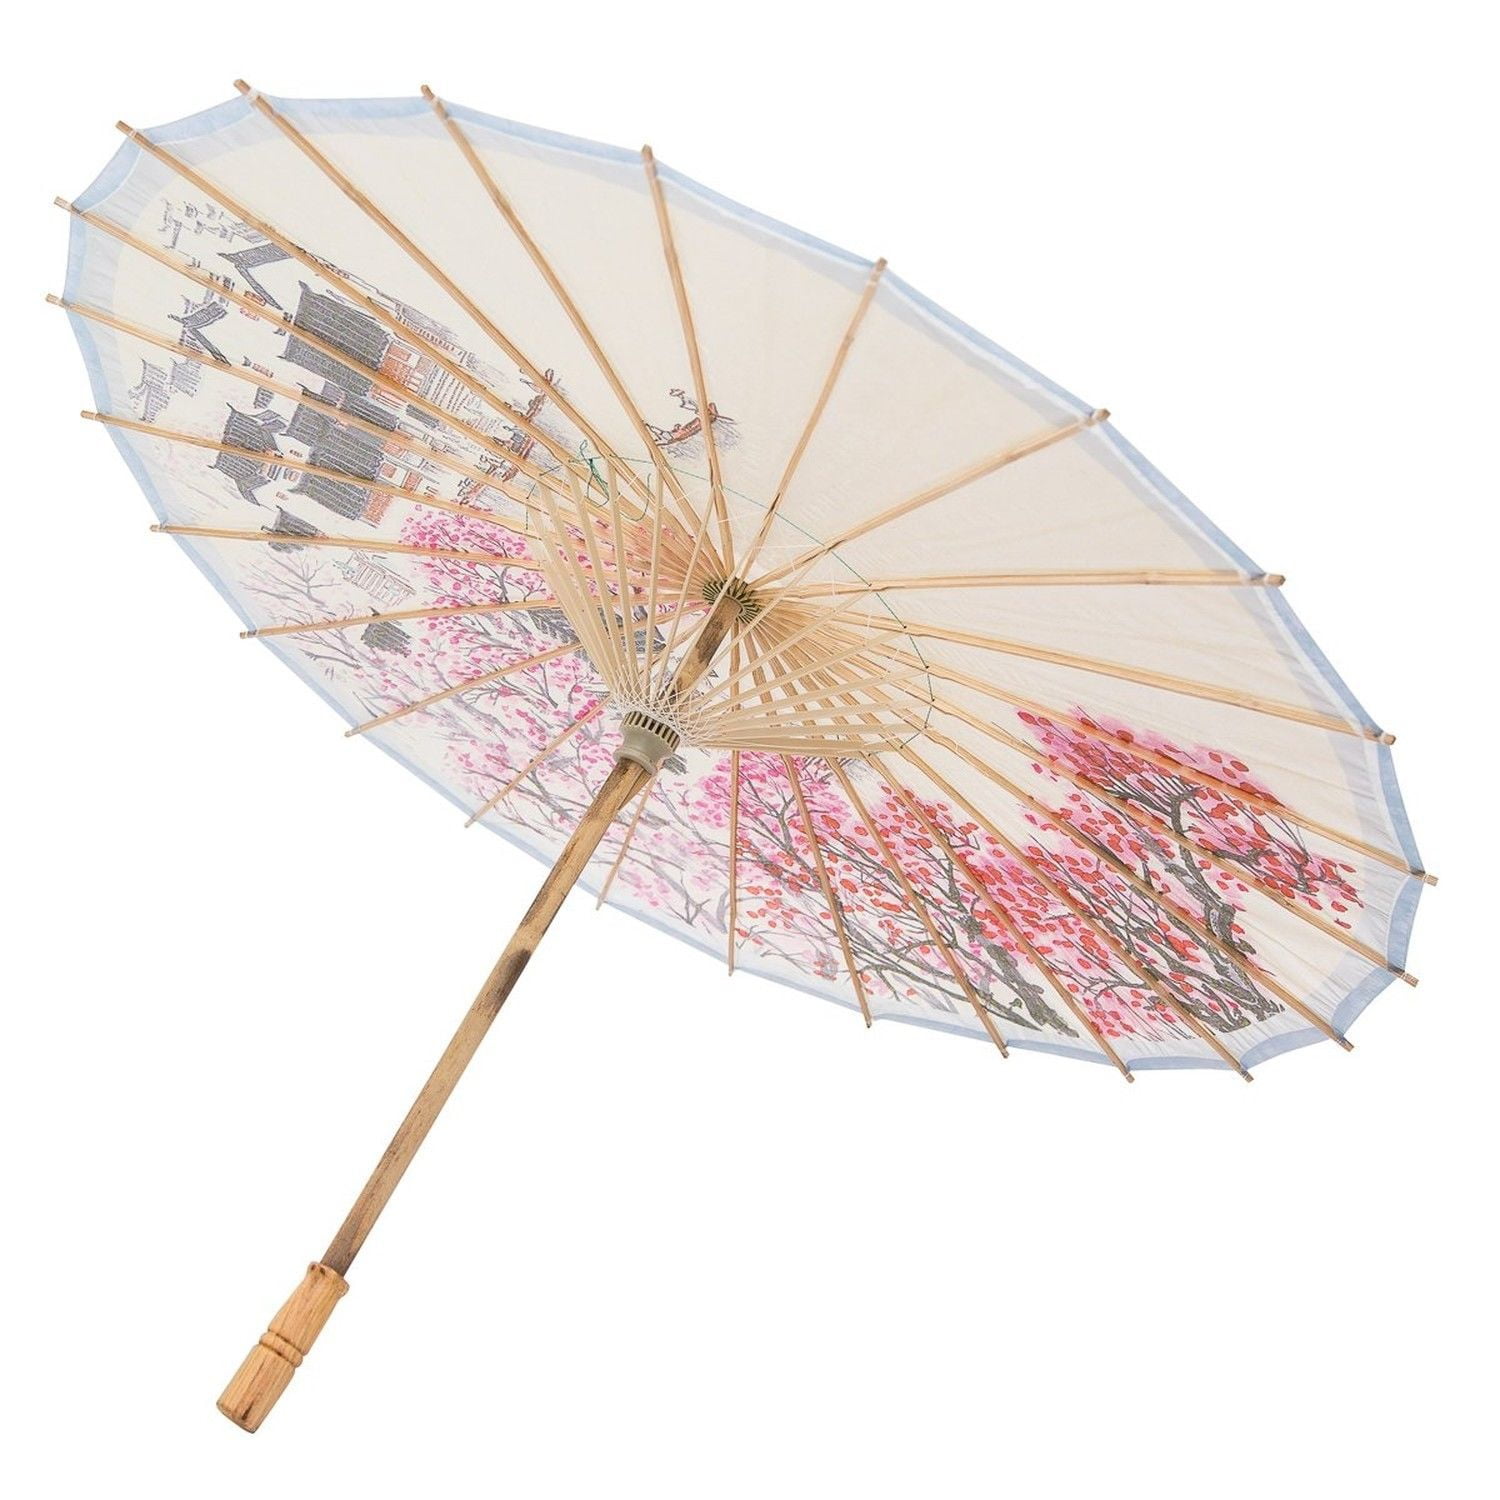 THY Collectibles Rainproof Handmade Chinese Oiled Paper Umbrella Parasol  33